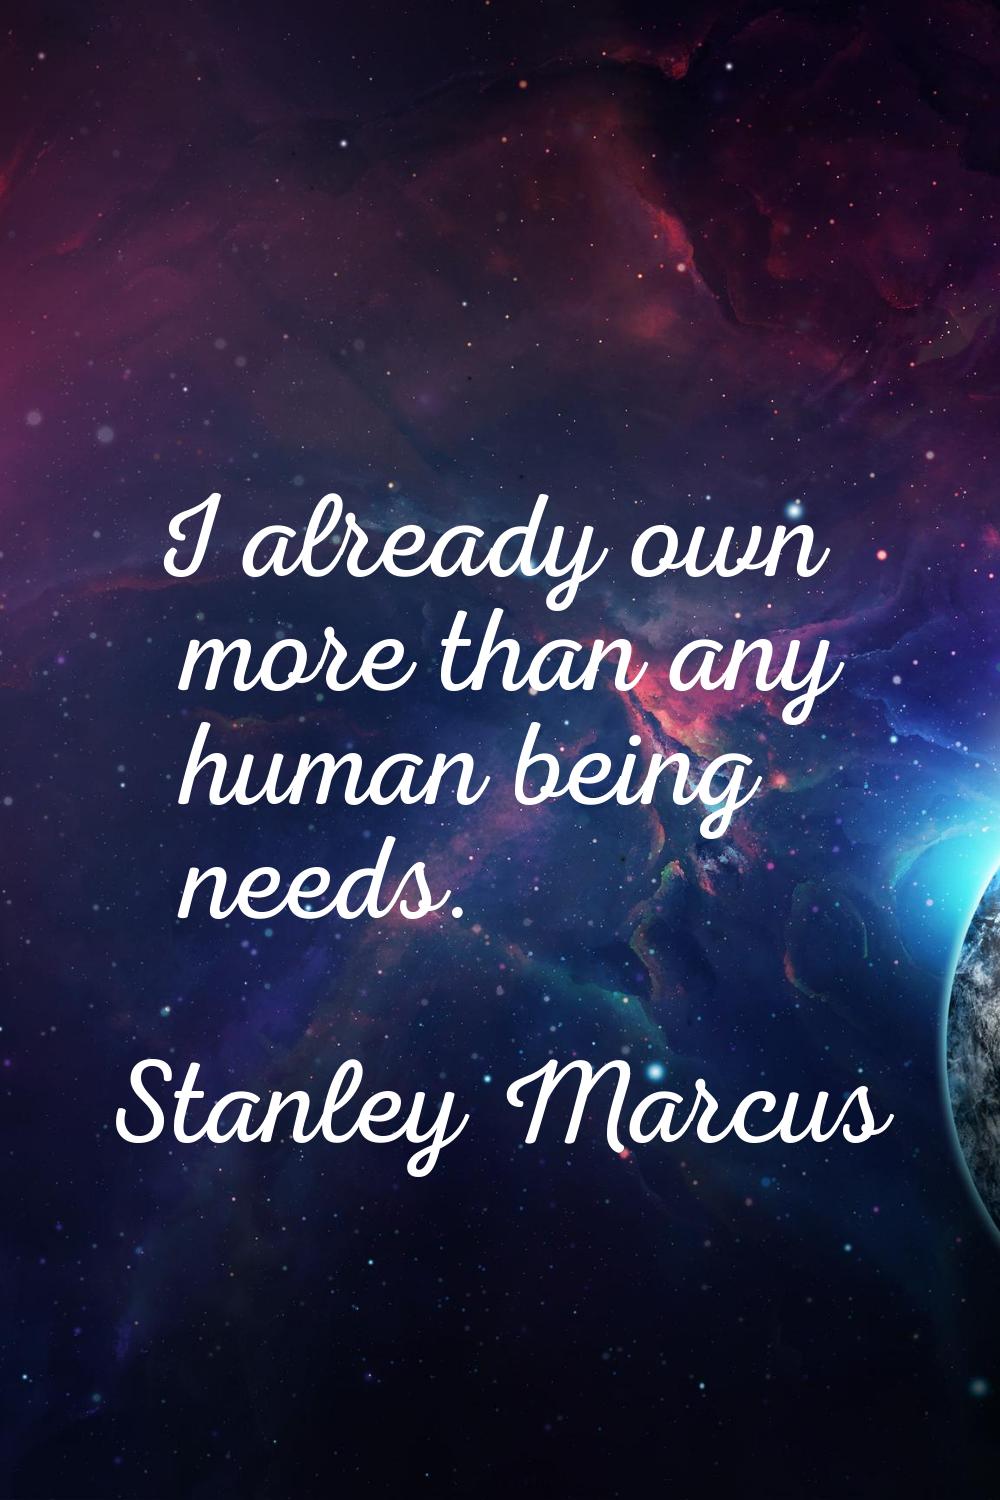 I already own more than any human being needs.